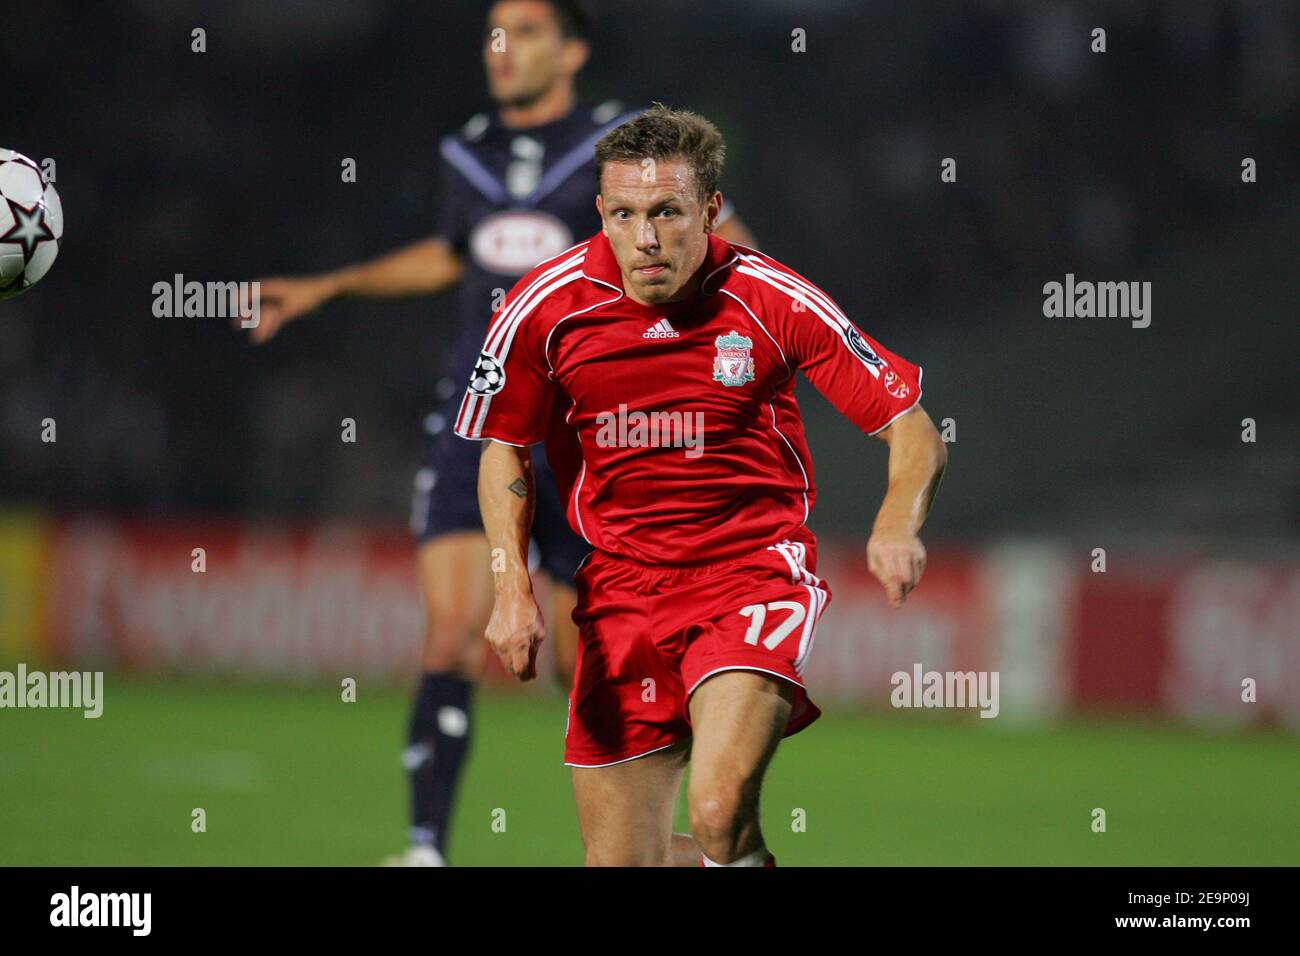 Liverpool's Craig Bellamy during the Champions League group C match, FC Girondins De Bordeaux vs Liverpool FC, at Chaban-Delmas Stadium in Bordeaux, France, on October 18, 2006. Liverpool won 1-0. Photo by Manuel Blondeau/Cameleon/ABACAPRESS.COM Stock Photo